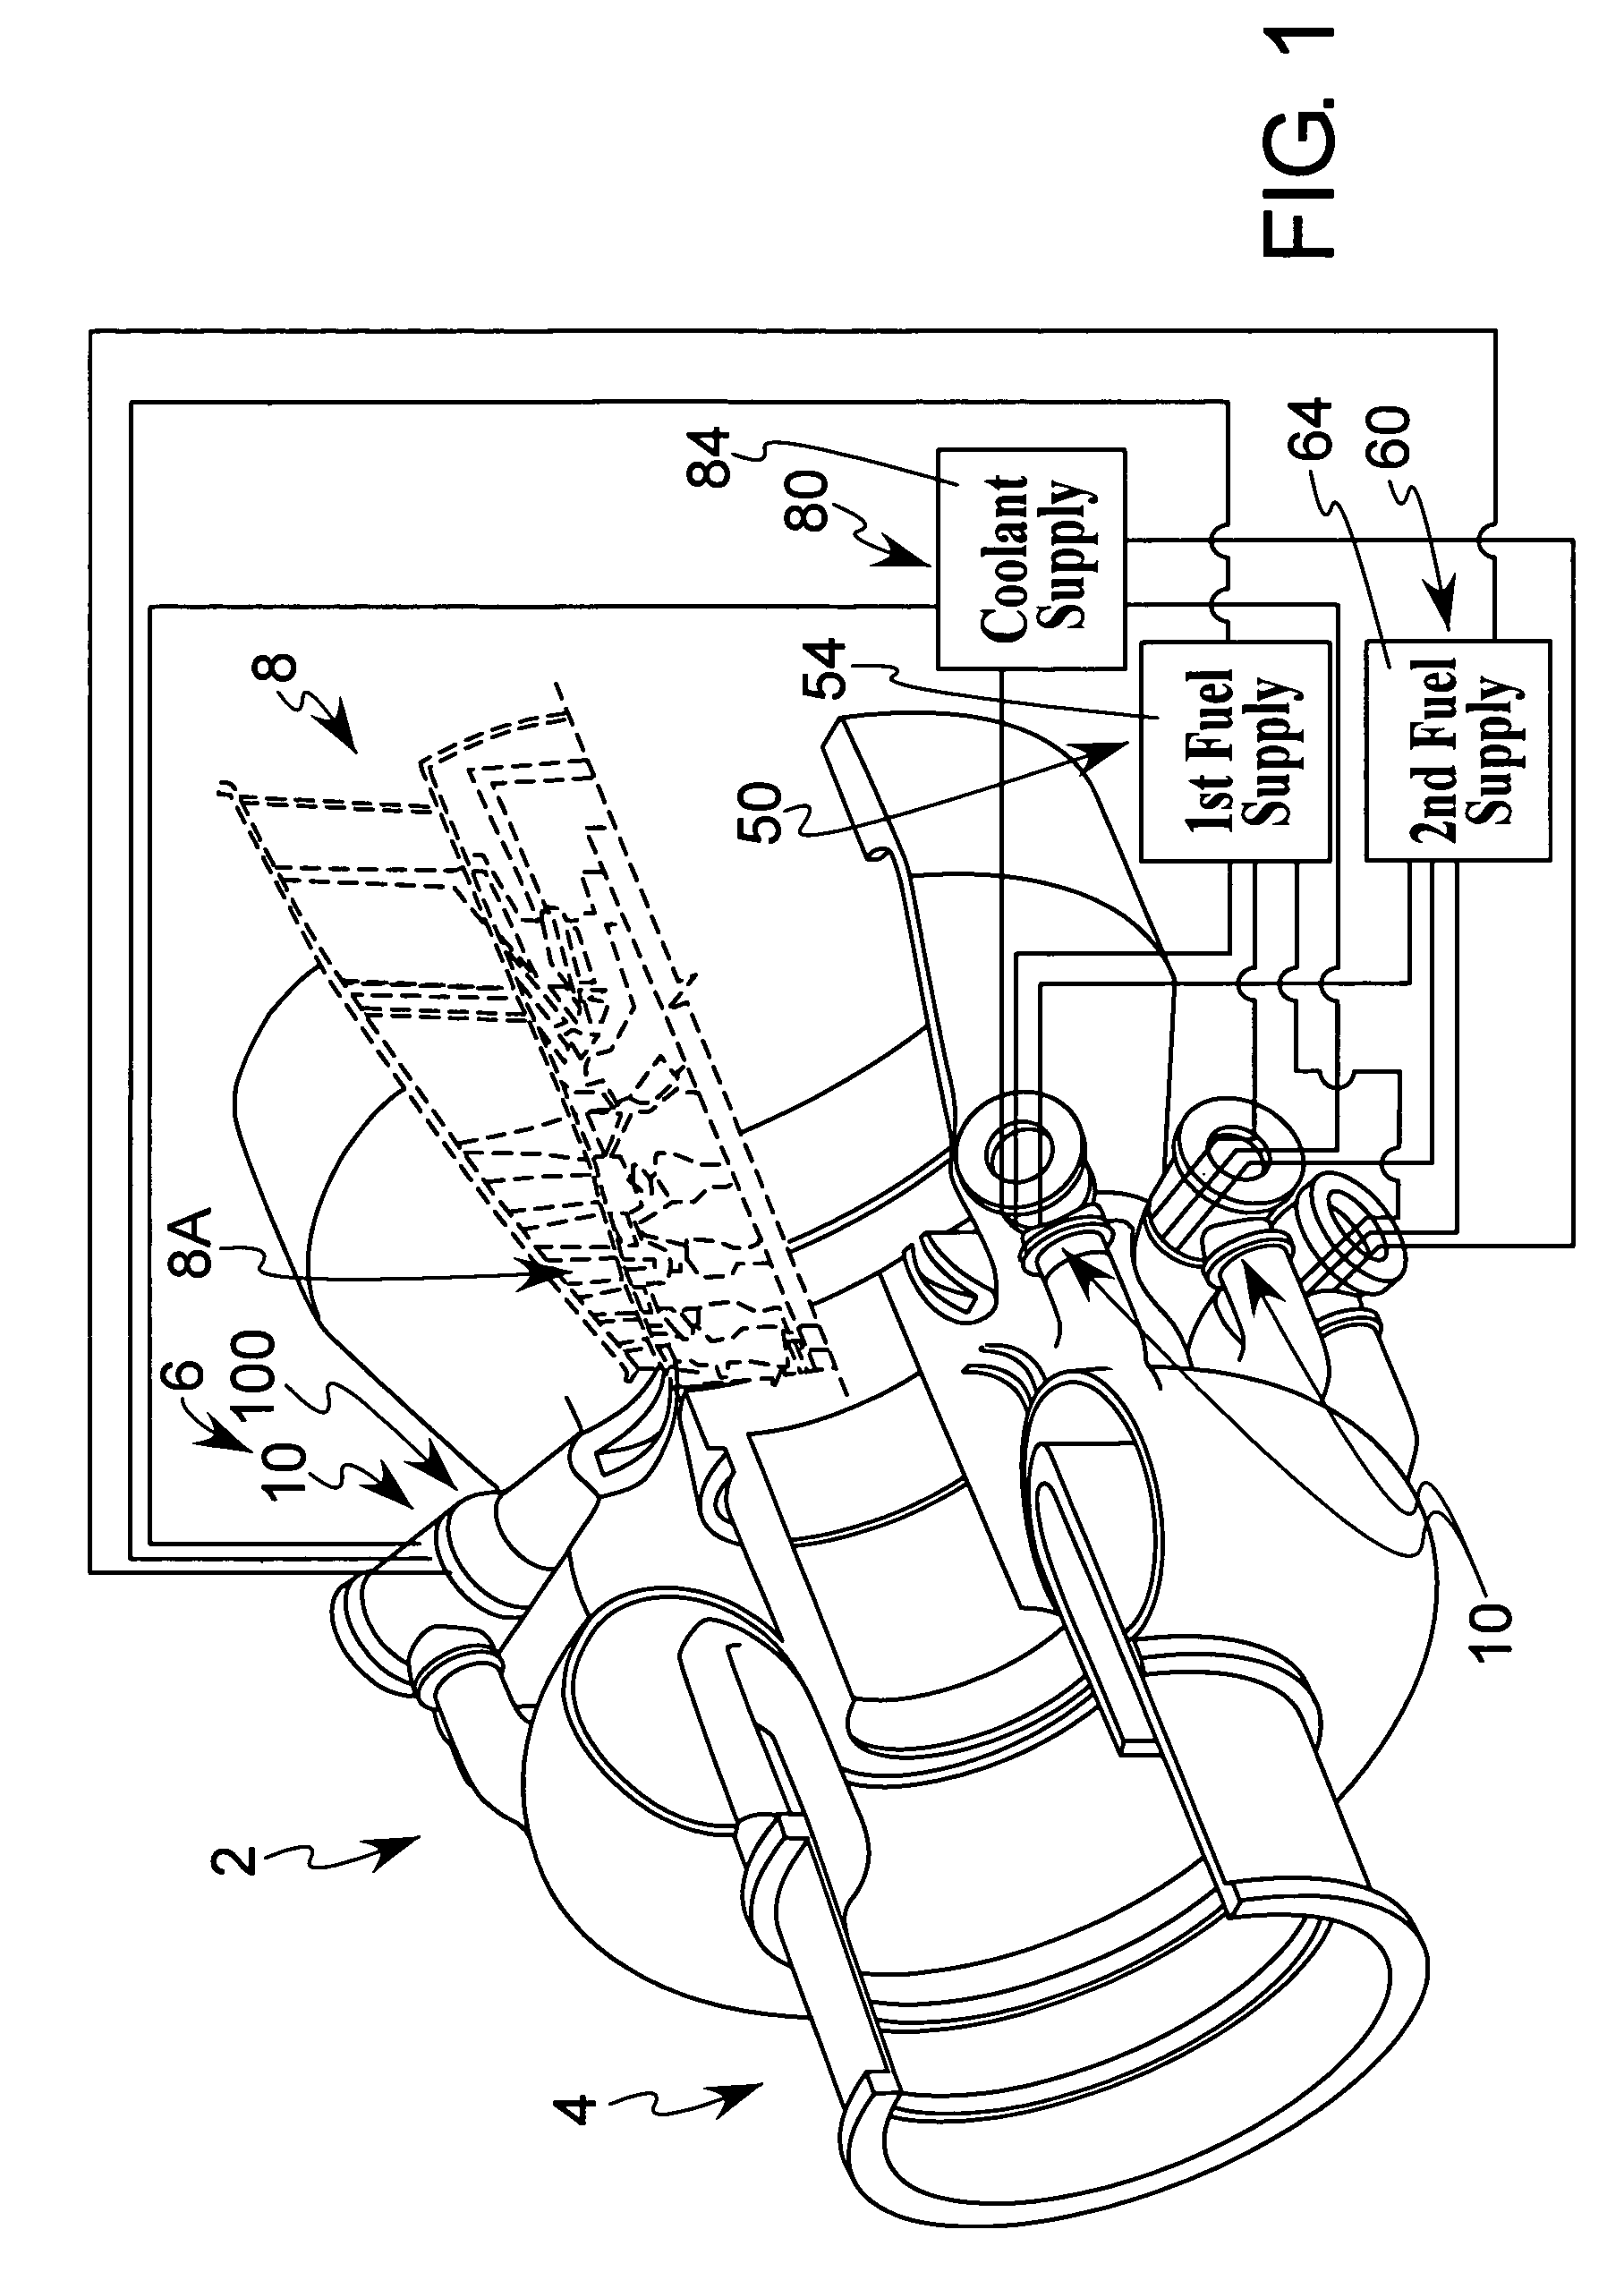 Axially staged combustion system for a gas turbine engine